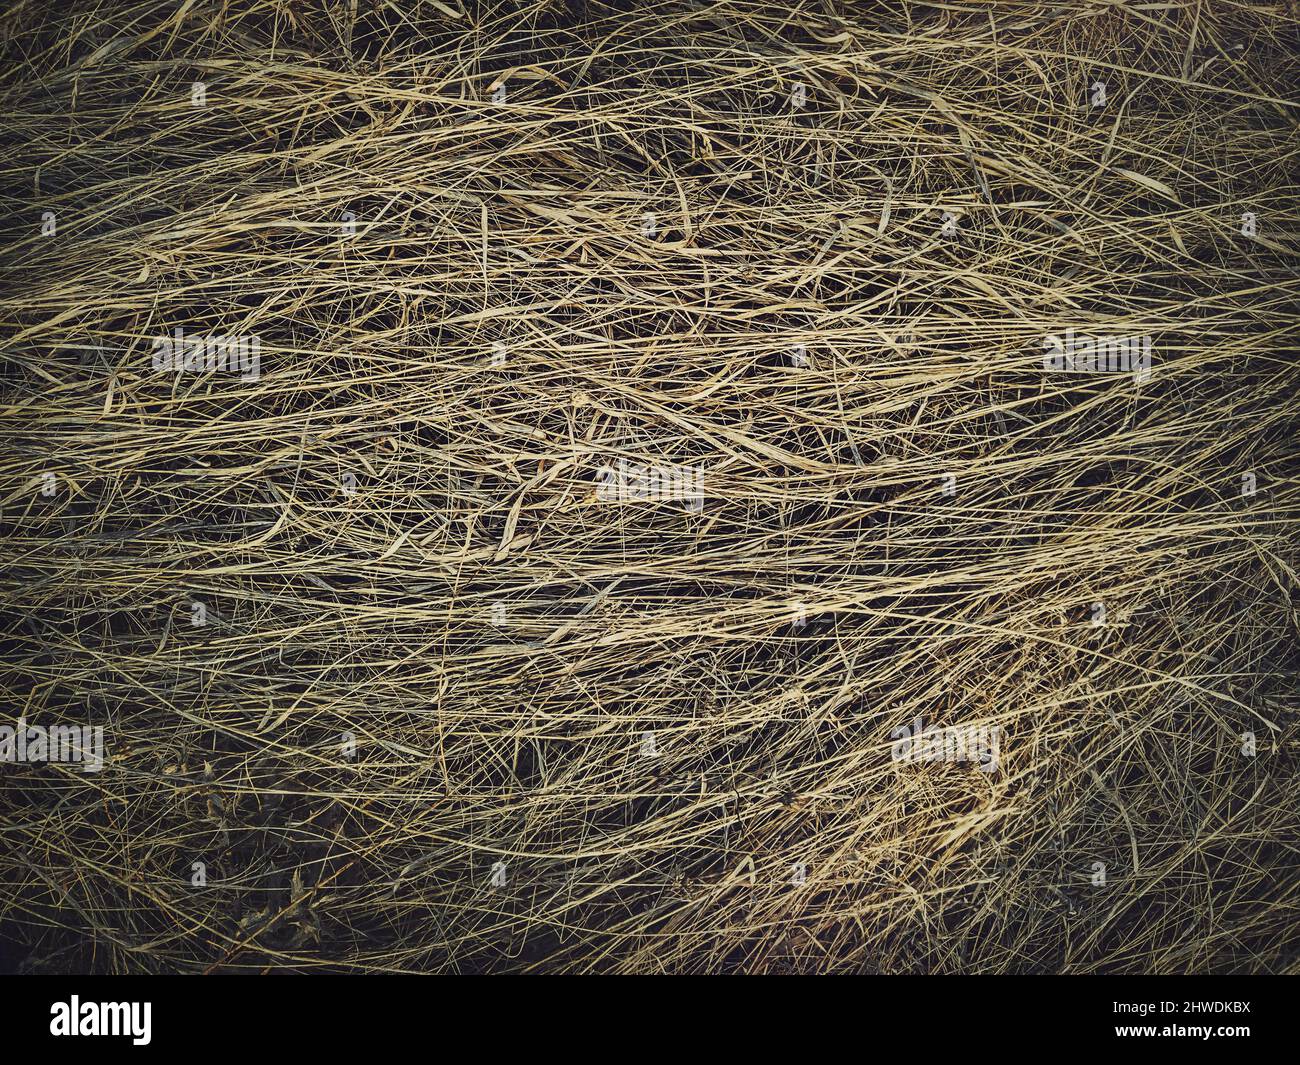 Dry grass texture. Withered wild plants and herb in the field, natural hay background. Parched vegetation Stock Photo